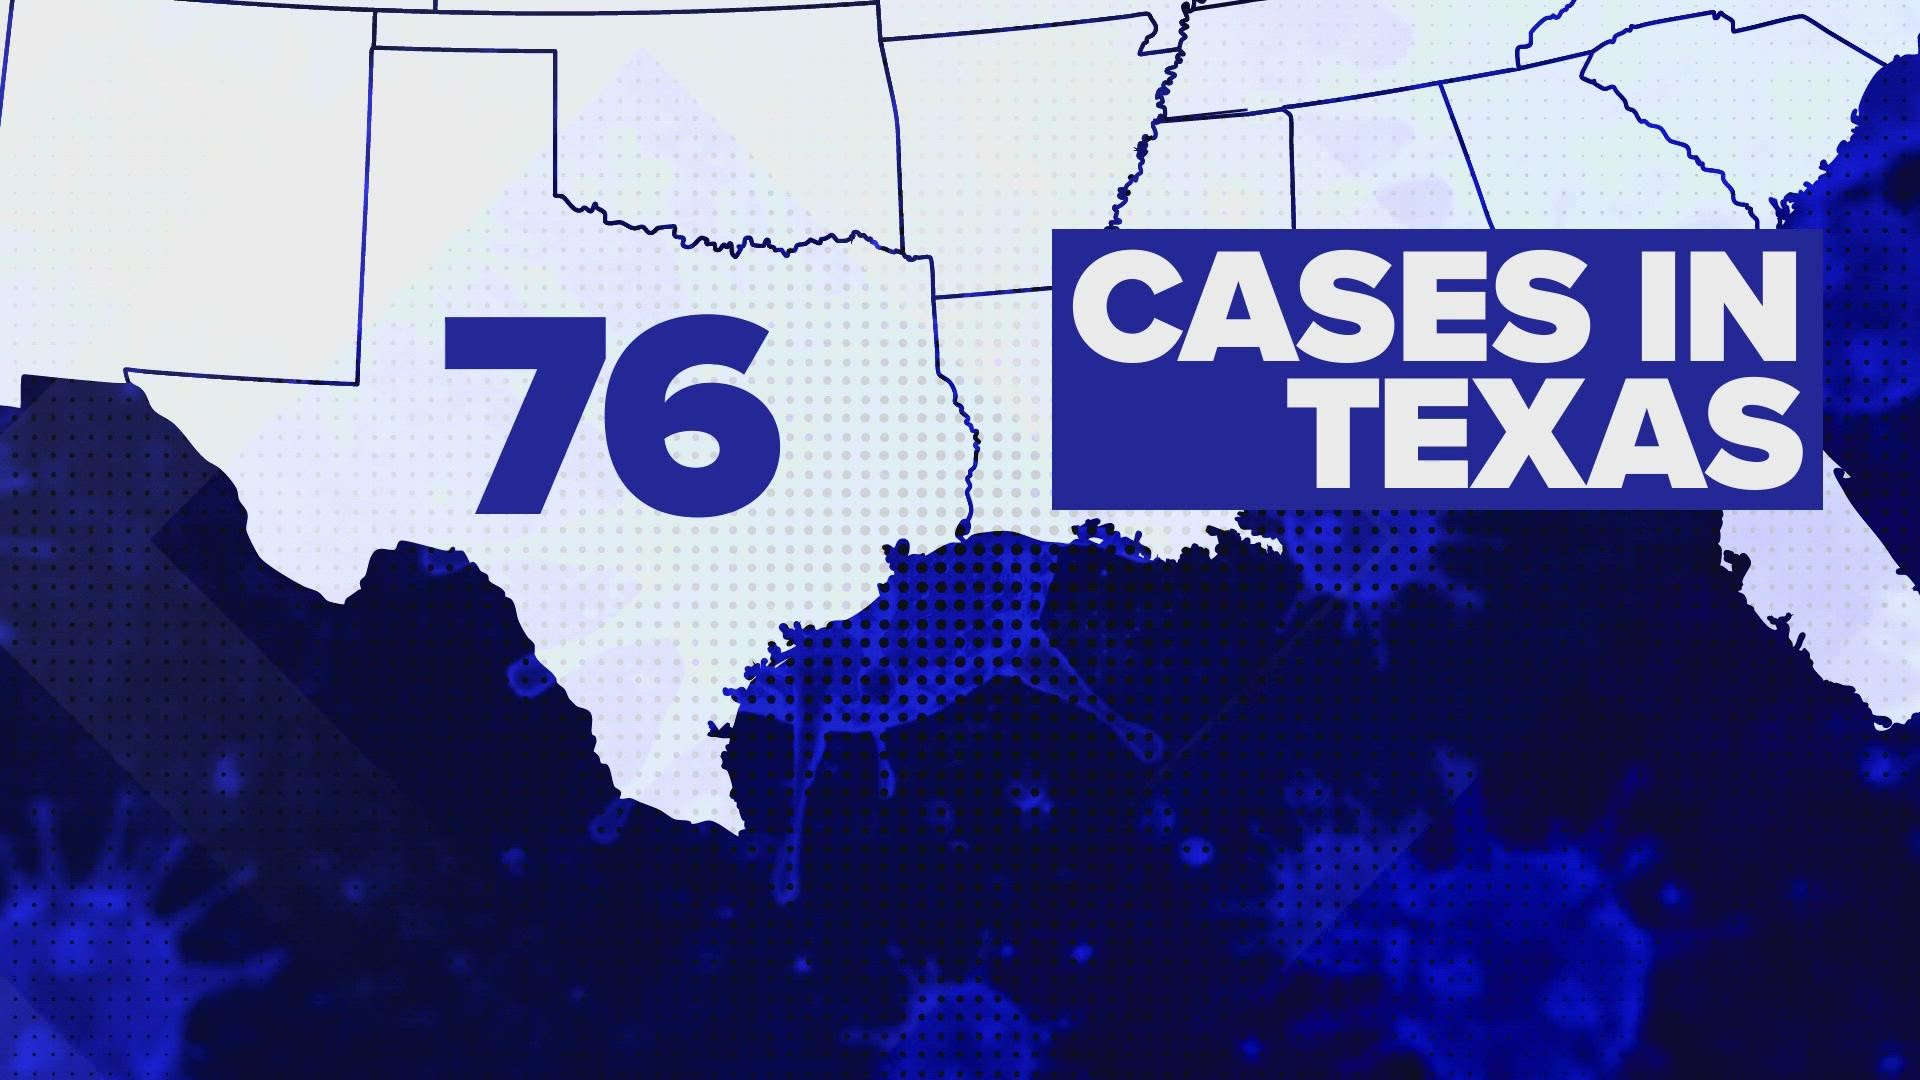 At least 76 cases have been reported across Texas, with 28 being reported in Dallas-Fort Worth. More than 1,400 cases have been reported across the U.S. to date.